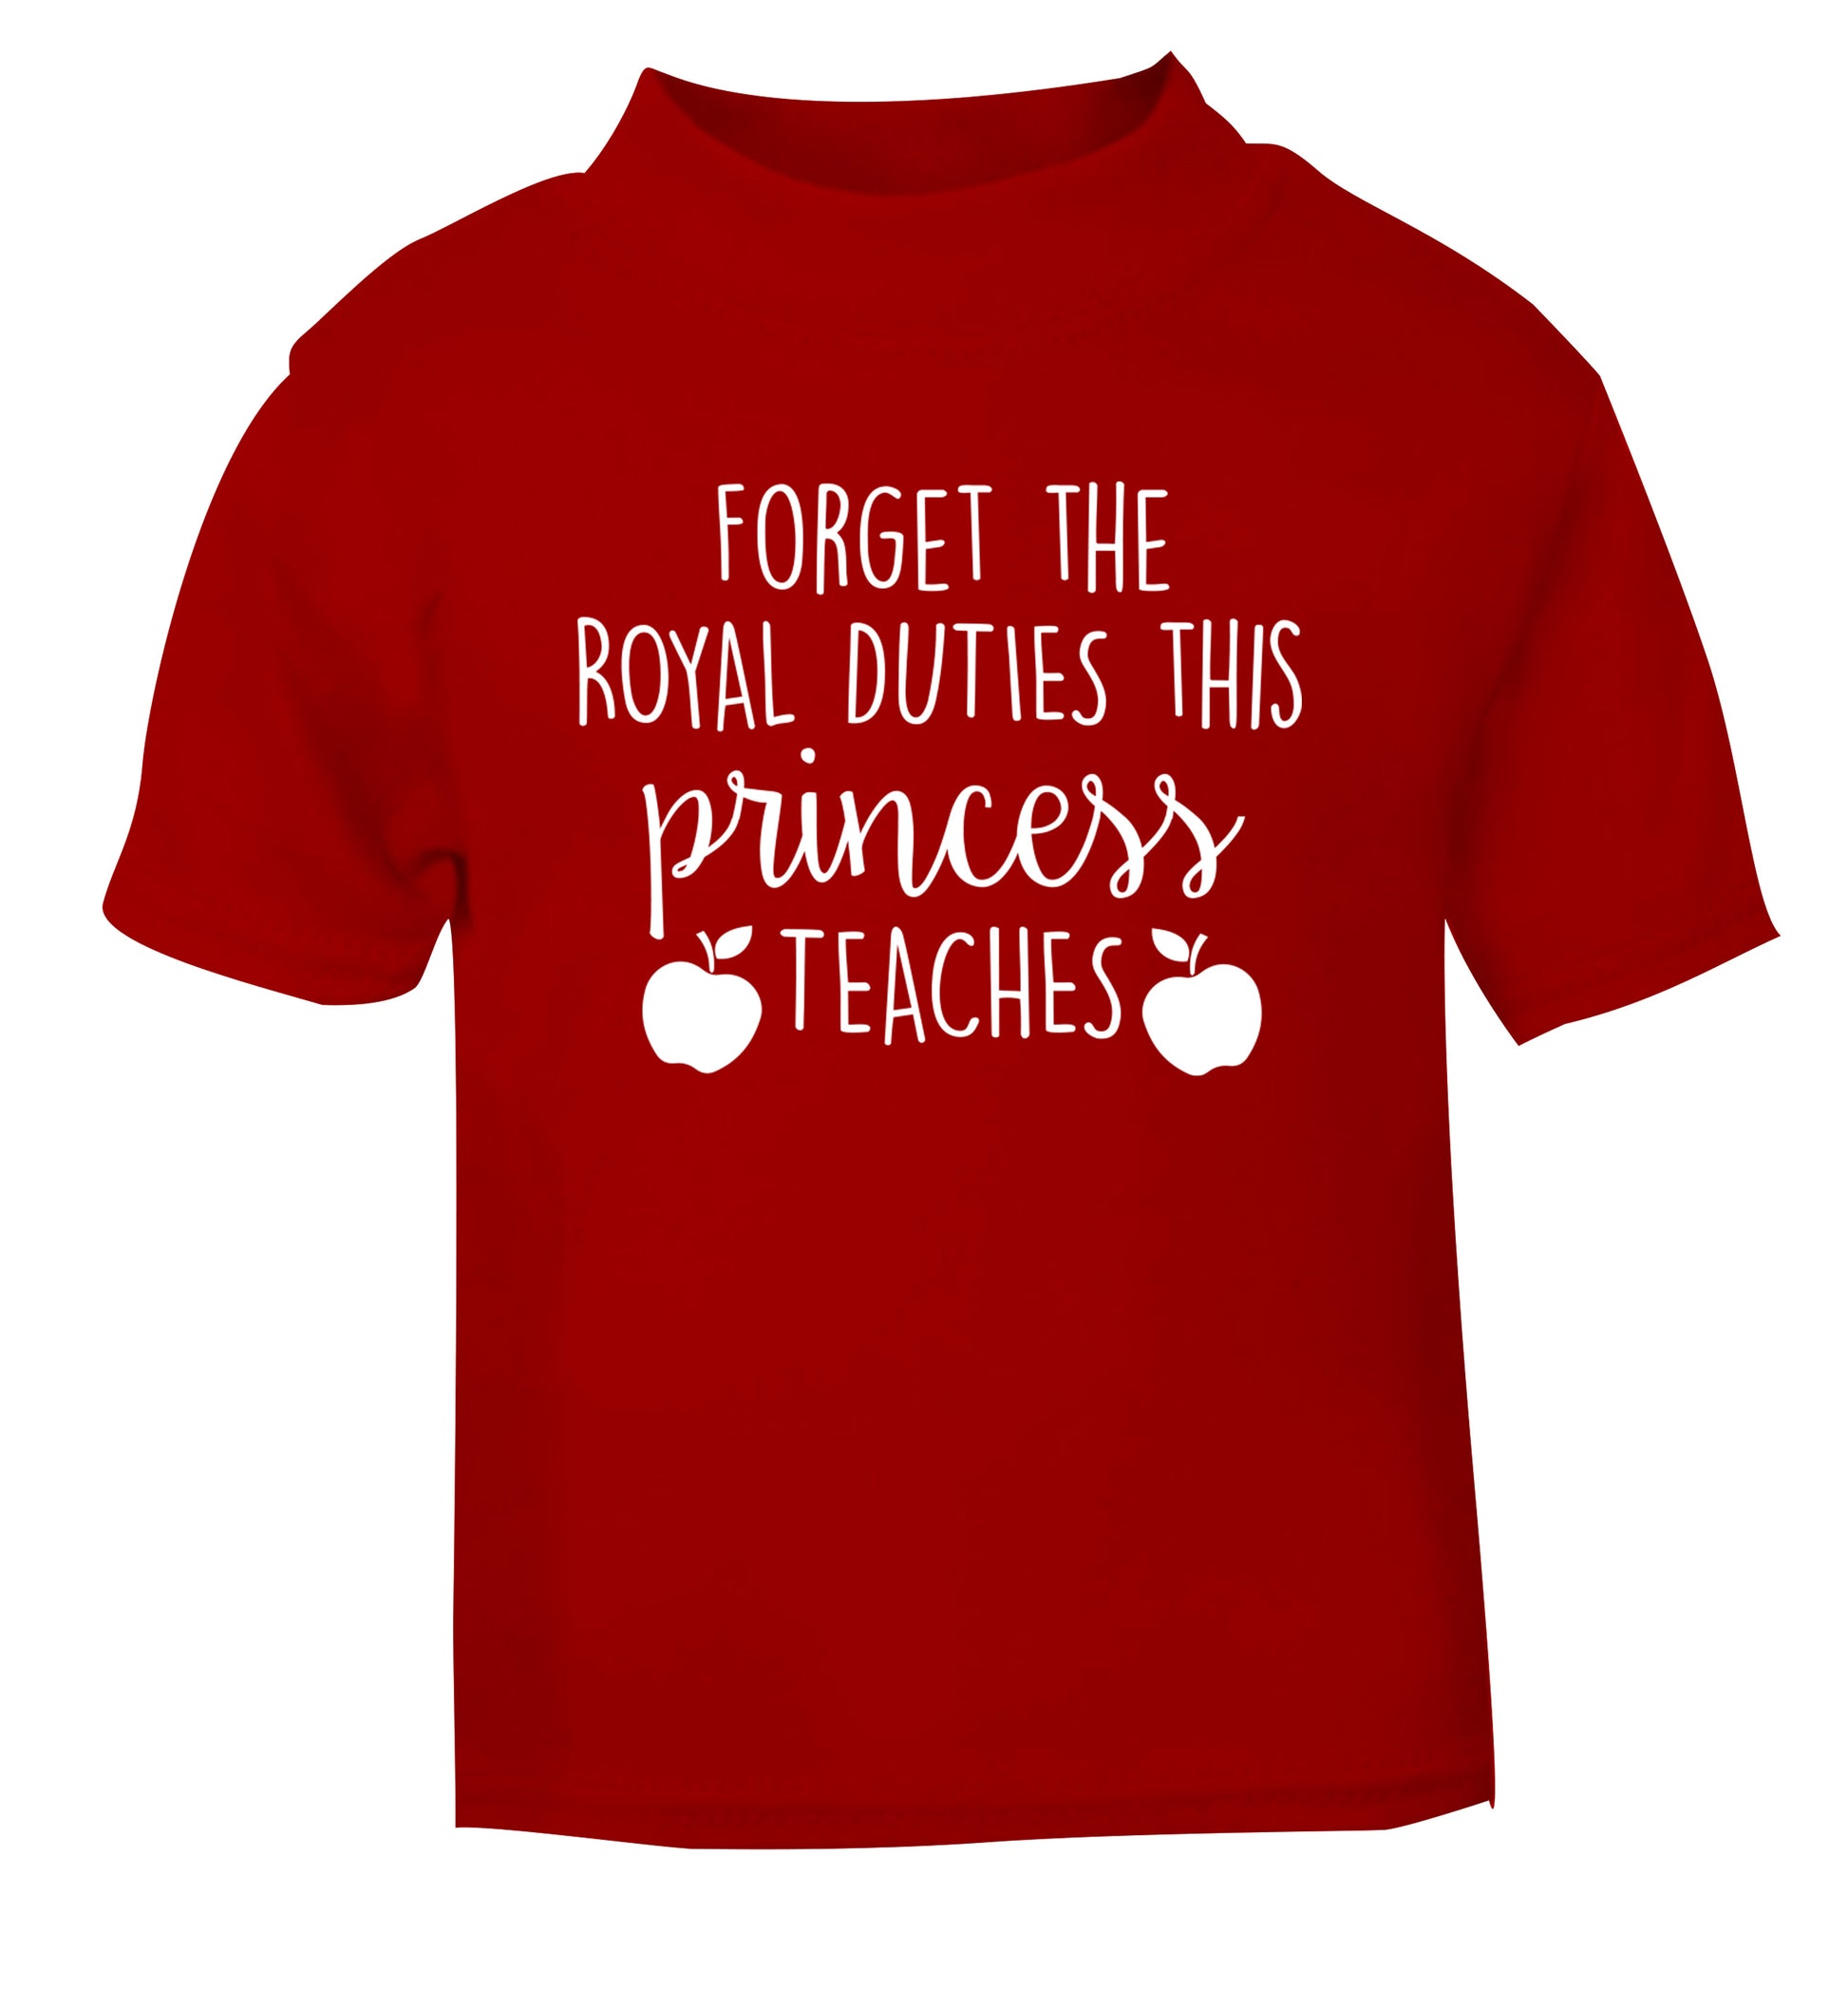 Forget the royal duties this princess teaches red Baby Toddler Tshirt 2 Years